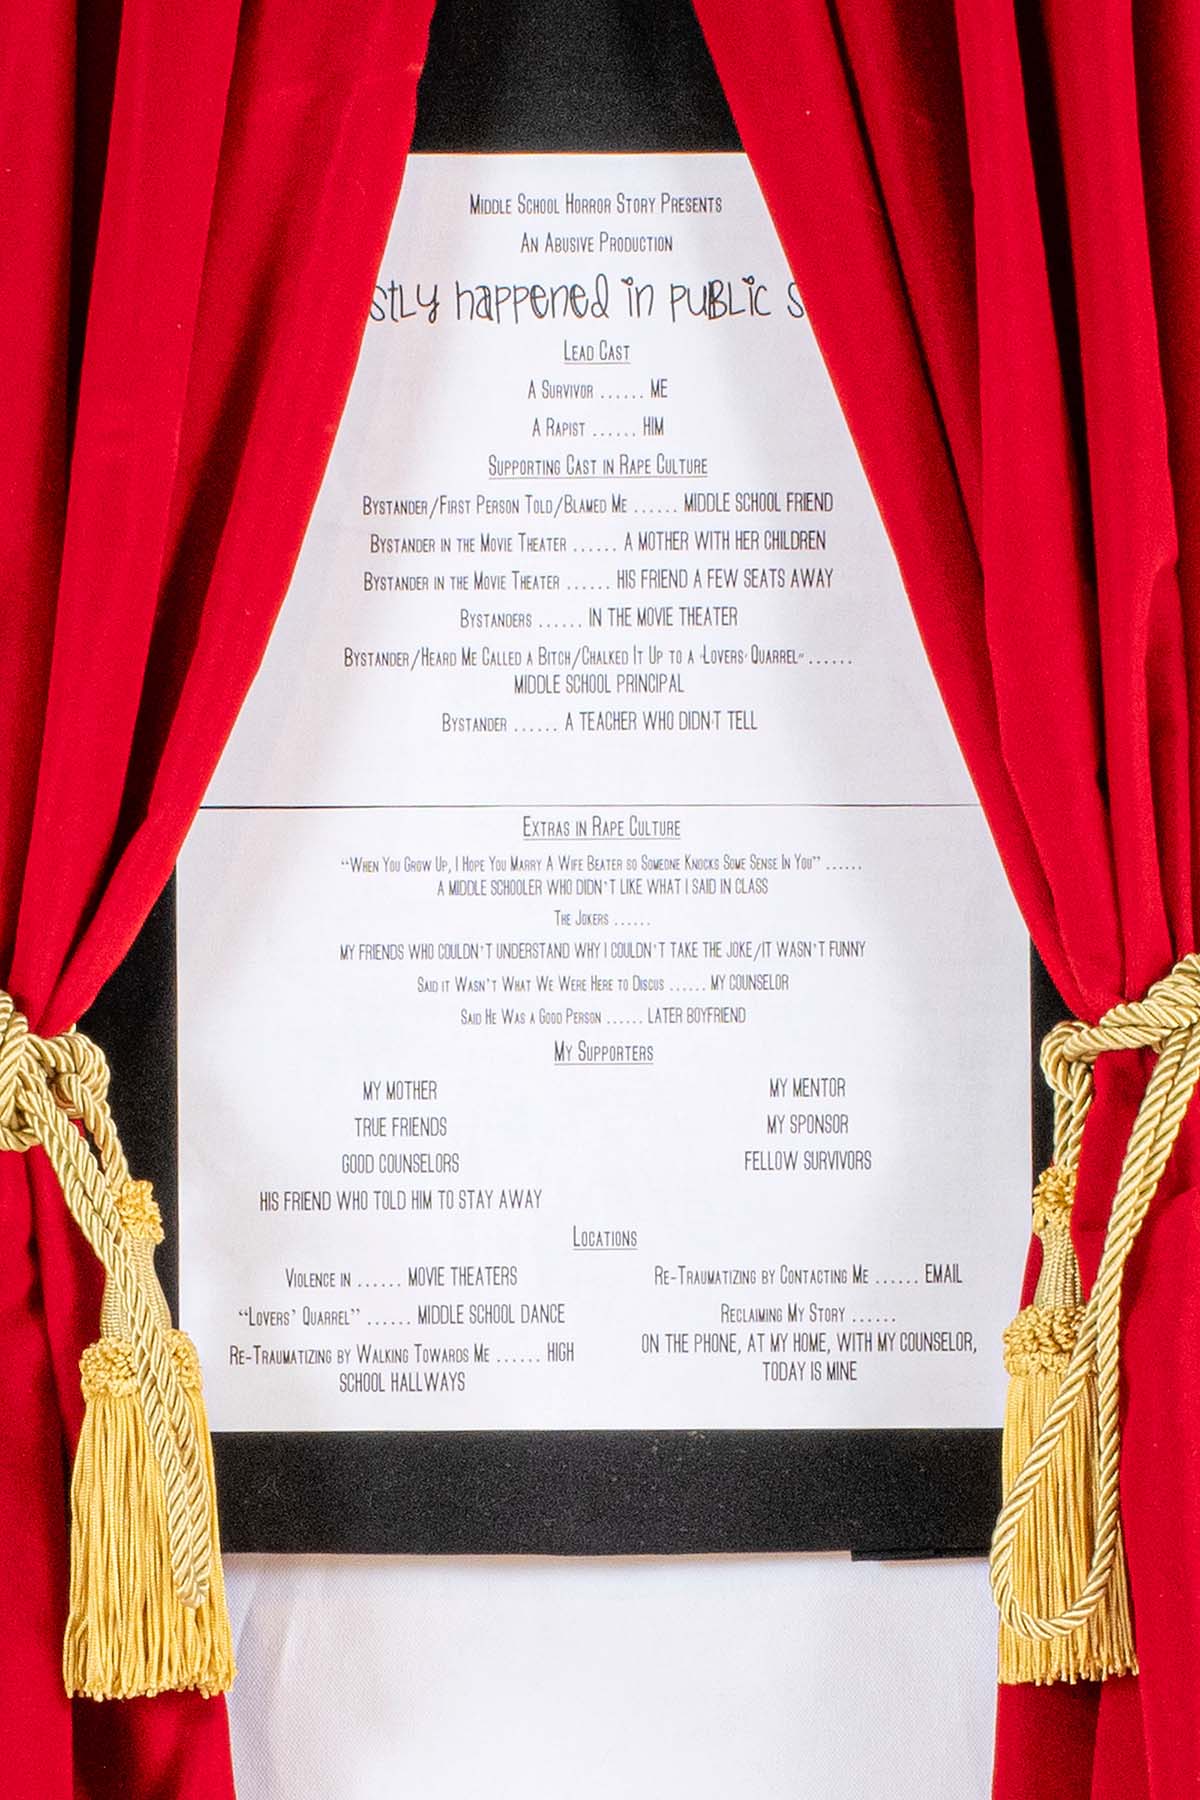 Close-up photo of the 'Abusive Production' cast listing, telling the story of an abusive relationship through a stage production metaphor